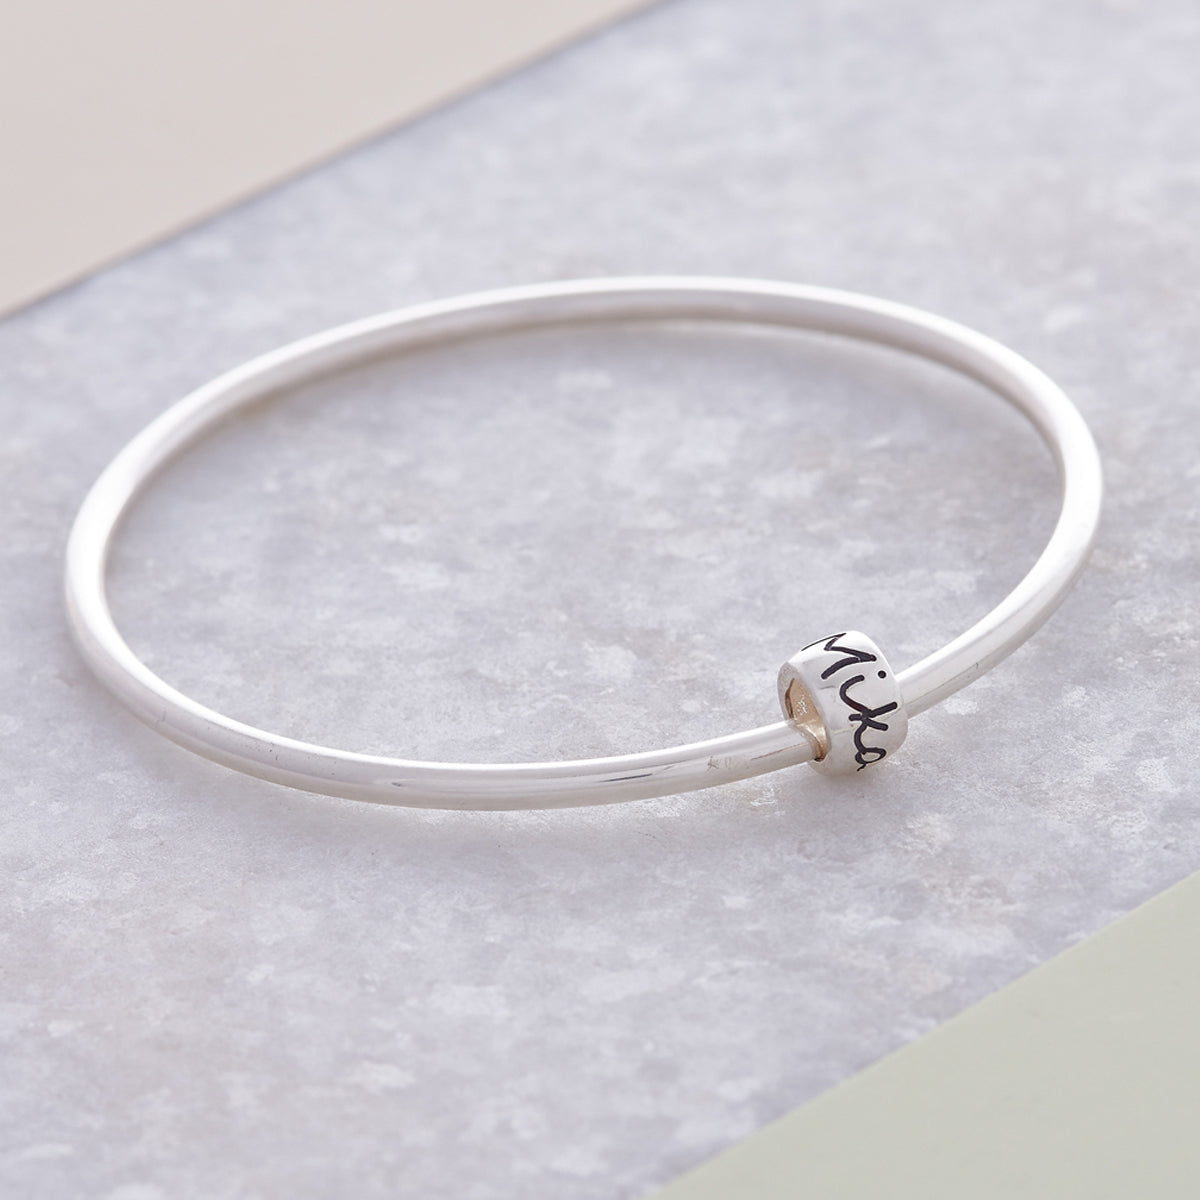 Personalised Silver Engraved Charm Bead Designer Charms on a silver bangle